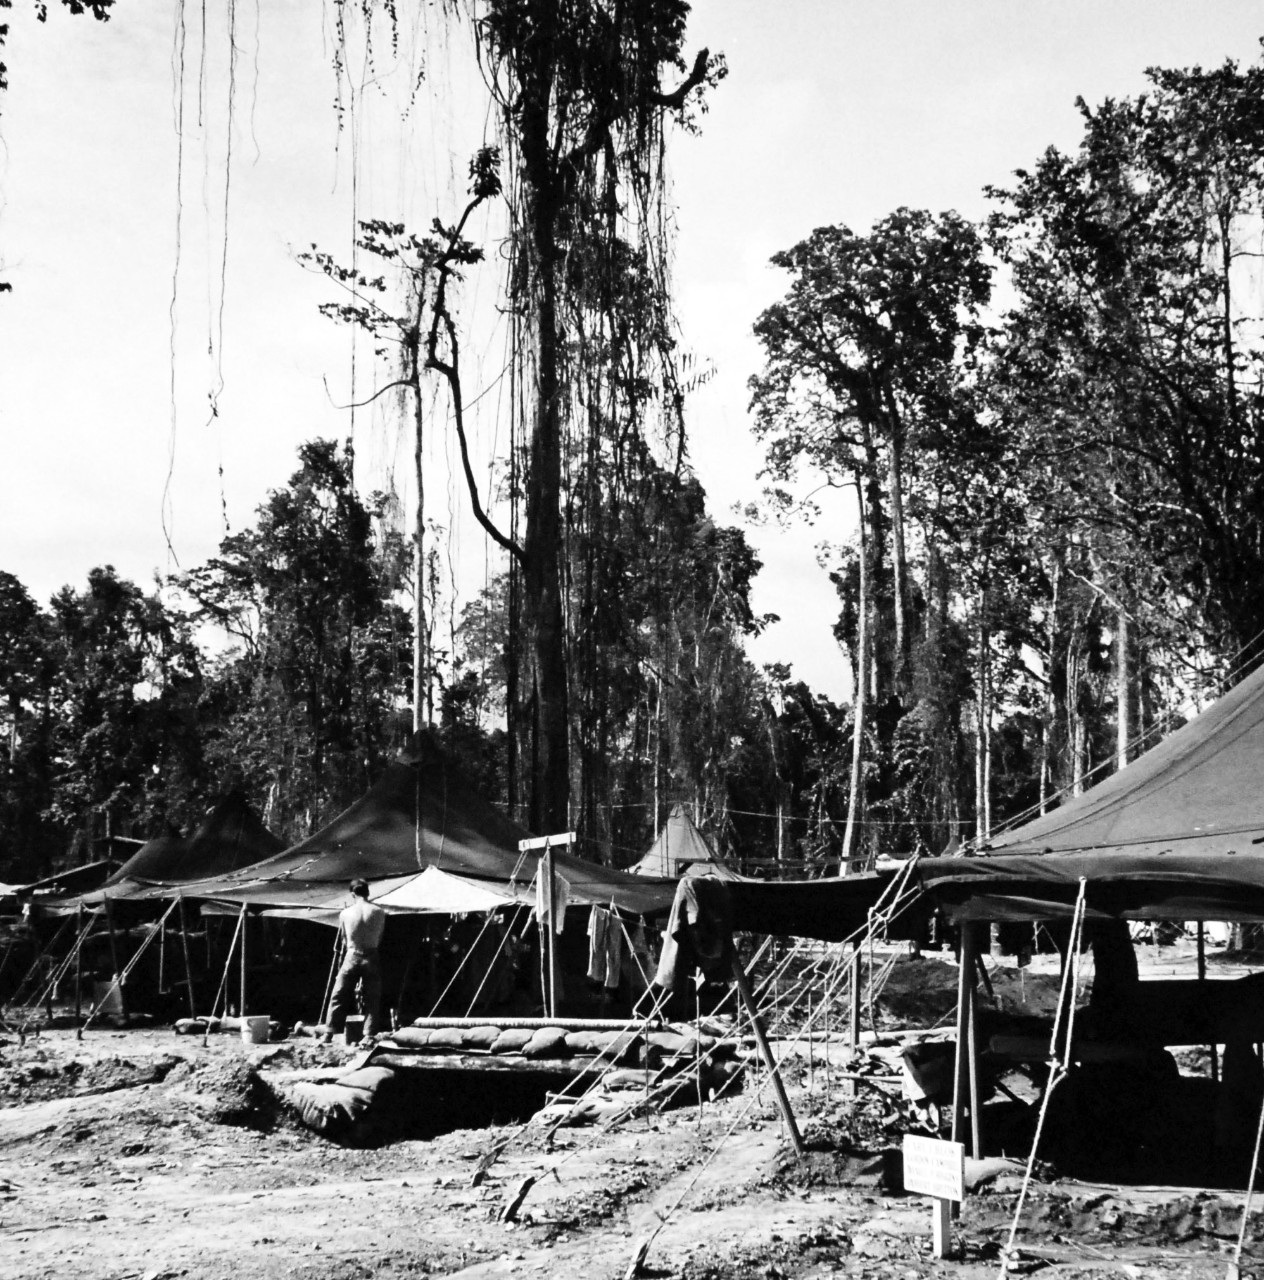 80-G-409062:  Bougainville Campaign, November 1943-August 1945.   Air raid shelters are conveniently close to Army tents in this jungle clearing o the perimeter of American positions around Empress Augusta Bay, Bougainville.  So close was this camp to the enemy that Japanese were frequently within sight and sound.  Steichen Photograph crew, TR-9546, February 1944.   Official U.S Navy   Photograph, now in the collections of the National Archives.  (2017/12/13).